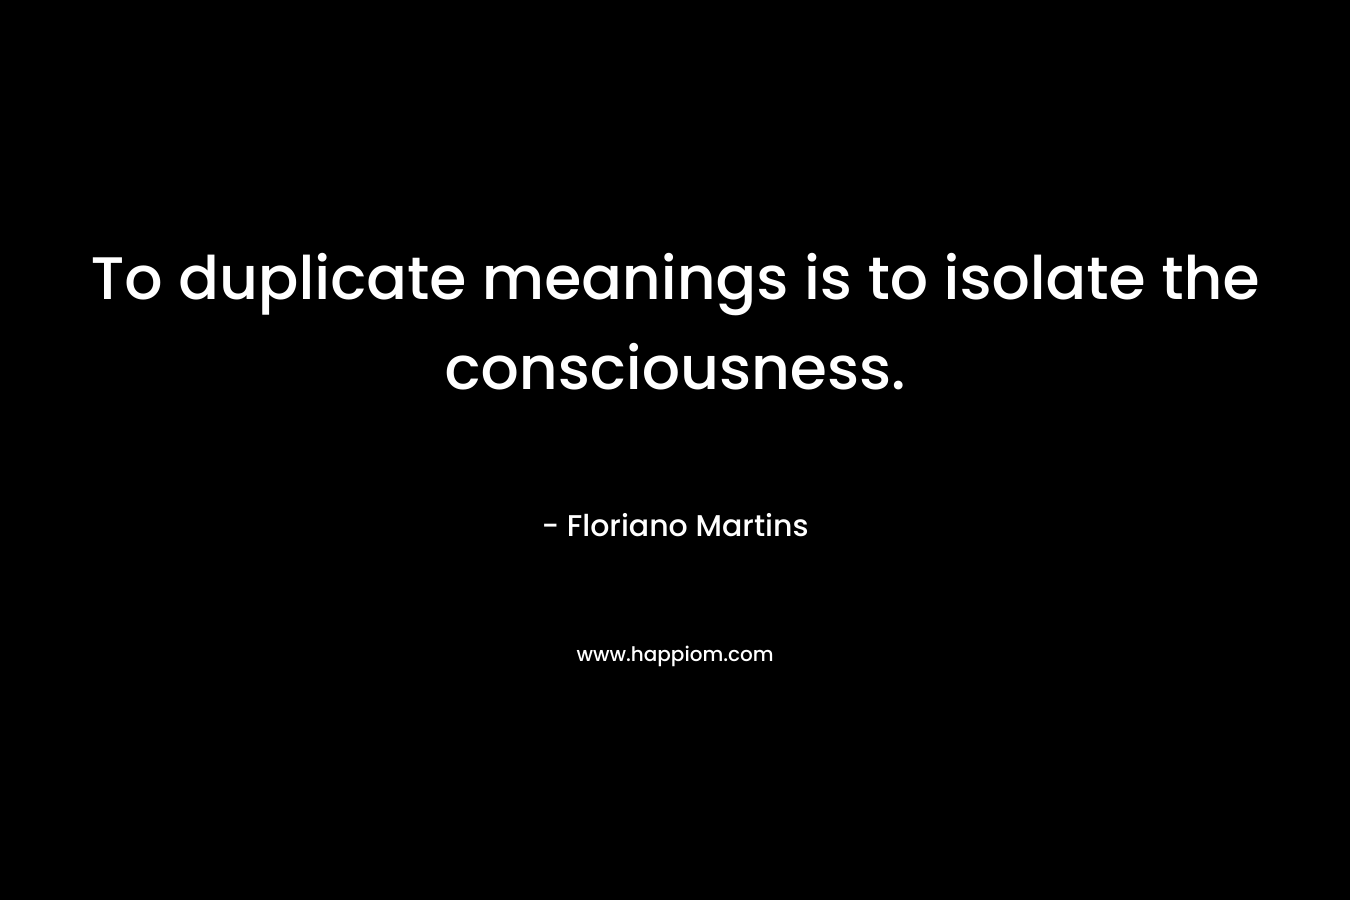 To duplicate meanings is to isolate the consciousness. – Floriano Martins